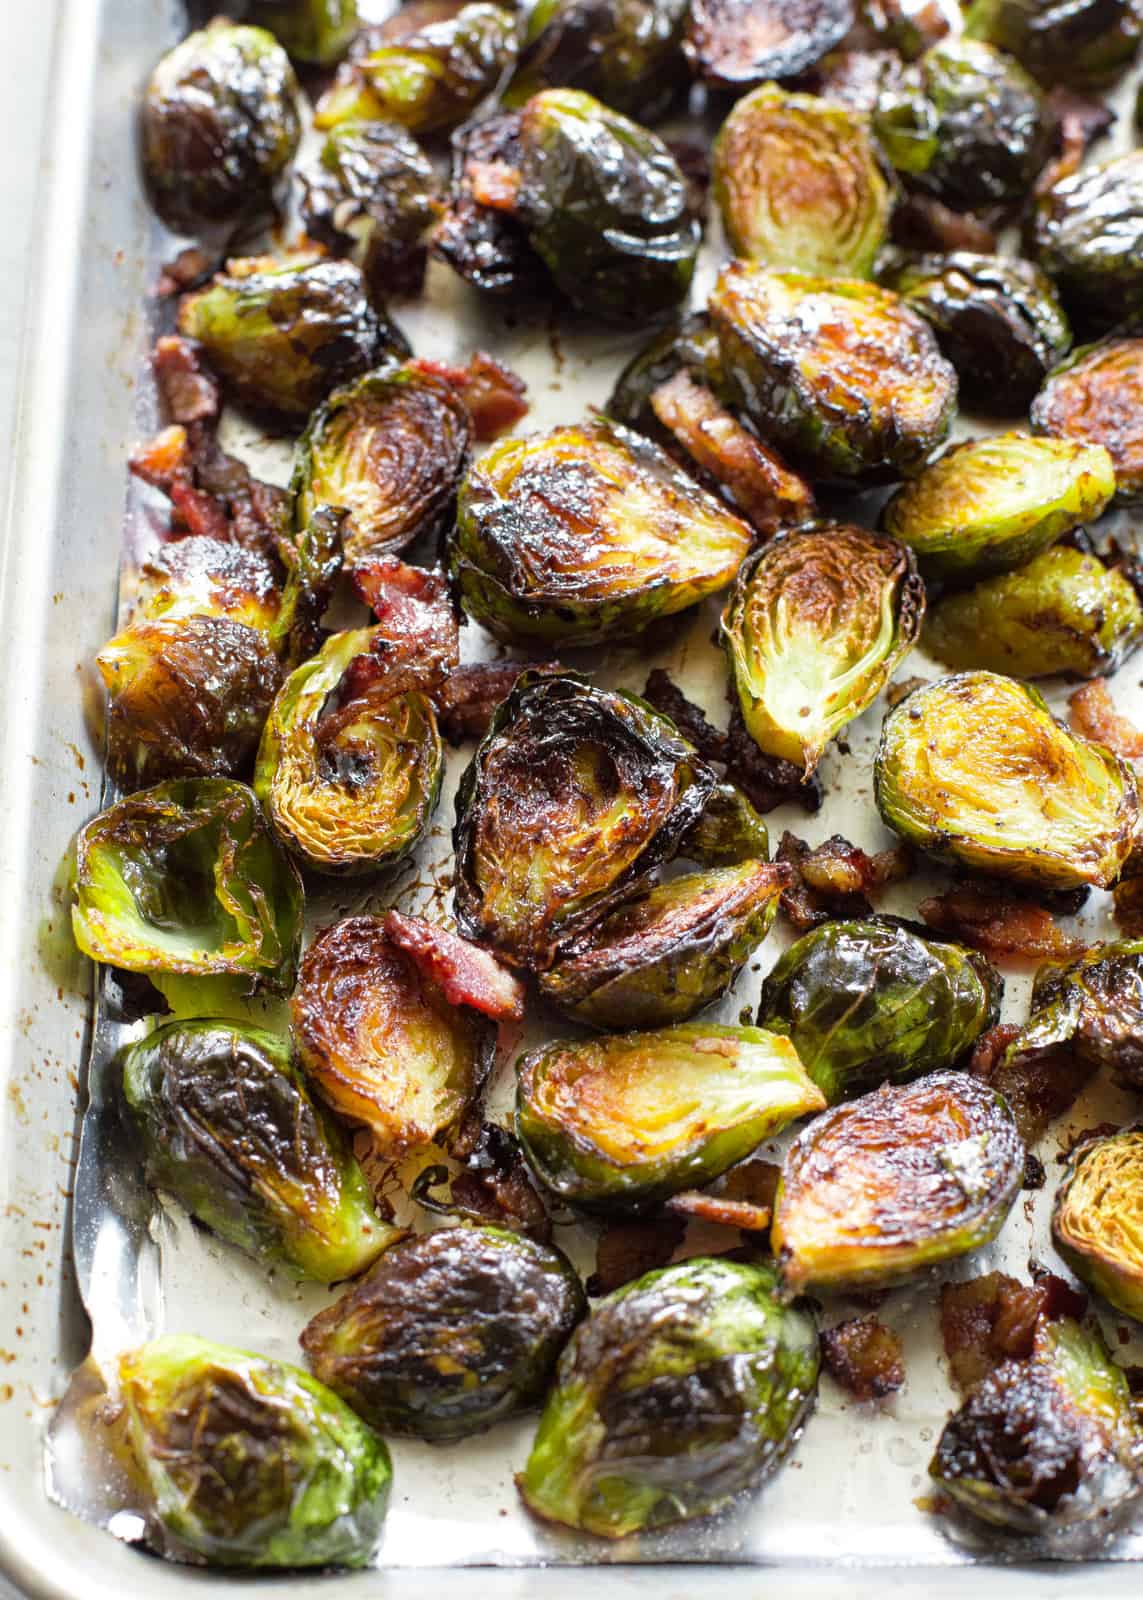 https://www.the-girl-who-ate-everything.com/wp-content/uploads/2020/02/roasted-brussels-sprouts-8.jpg